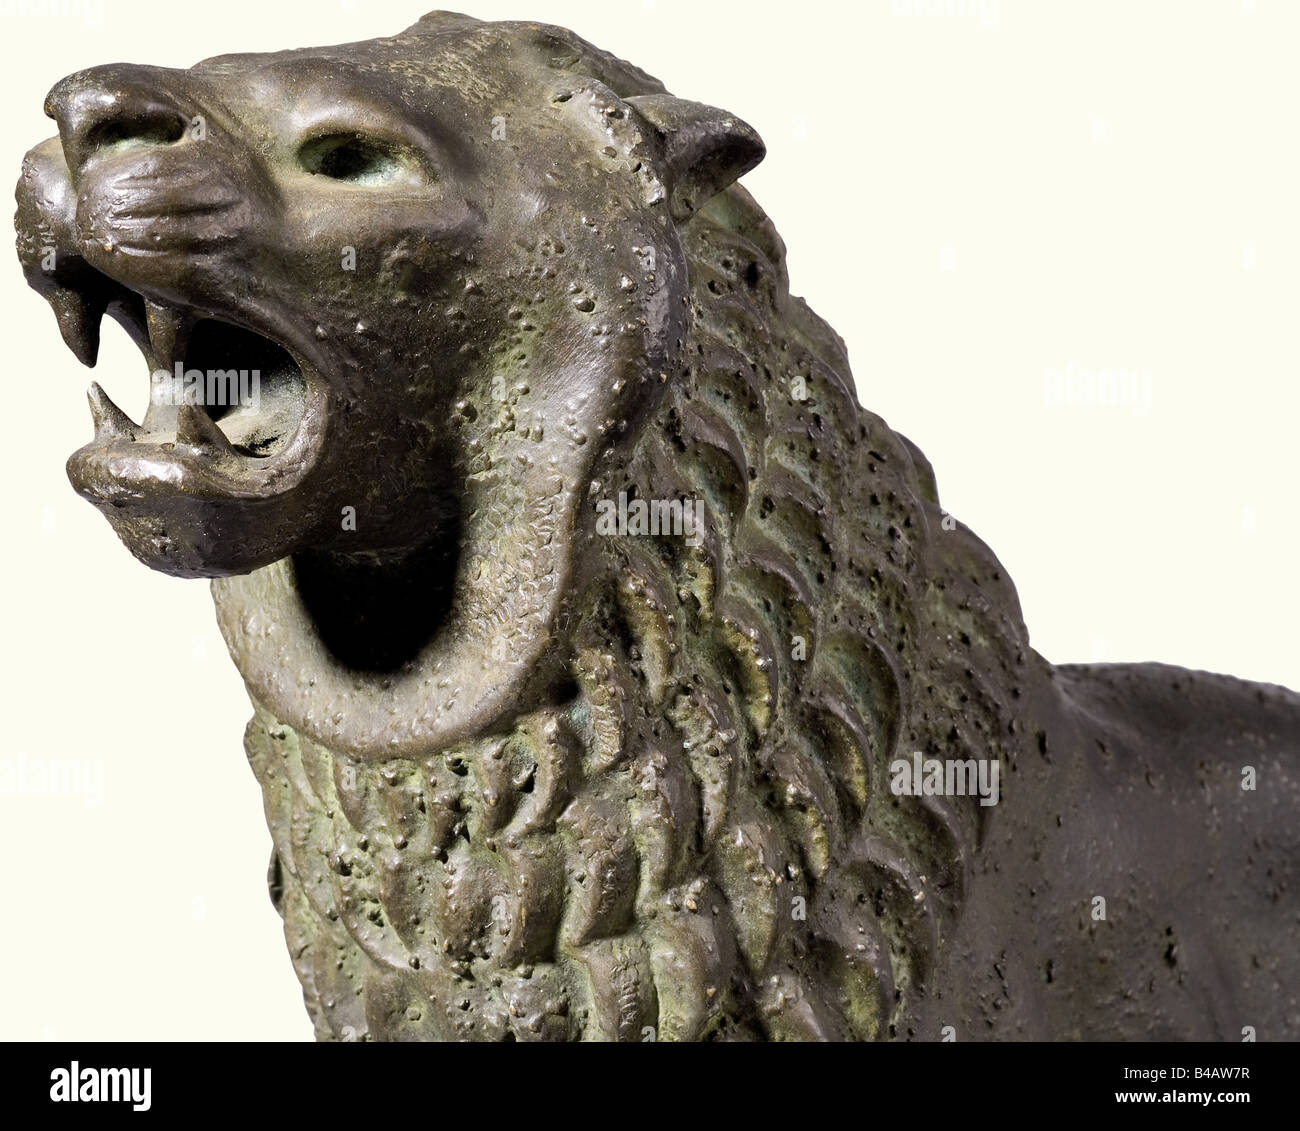 Jacques Benoist-Méchin - Barbary lion, by Arno Breker (1900 - 1991)., Breker created this figure in 1970. Bronze, the underside of the paws signed 'Arno Breker' and 'Guss Schmau'. Height 23 cm, length 34 cm. On black marble base. A present from Breker to Benoist-Méchin. The Barbary lion can be found on a sketch of the 'Monument for the Liberation of Africa', on which Breker began to work in 1970 at the request of King Hassan II of Morocco. It was to be errected at the United Nations Square in Casablanca. Breker received the commission for this project through t, Stock Photo